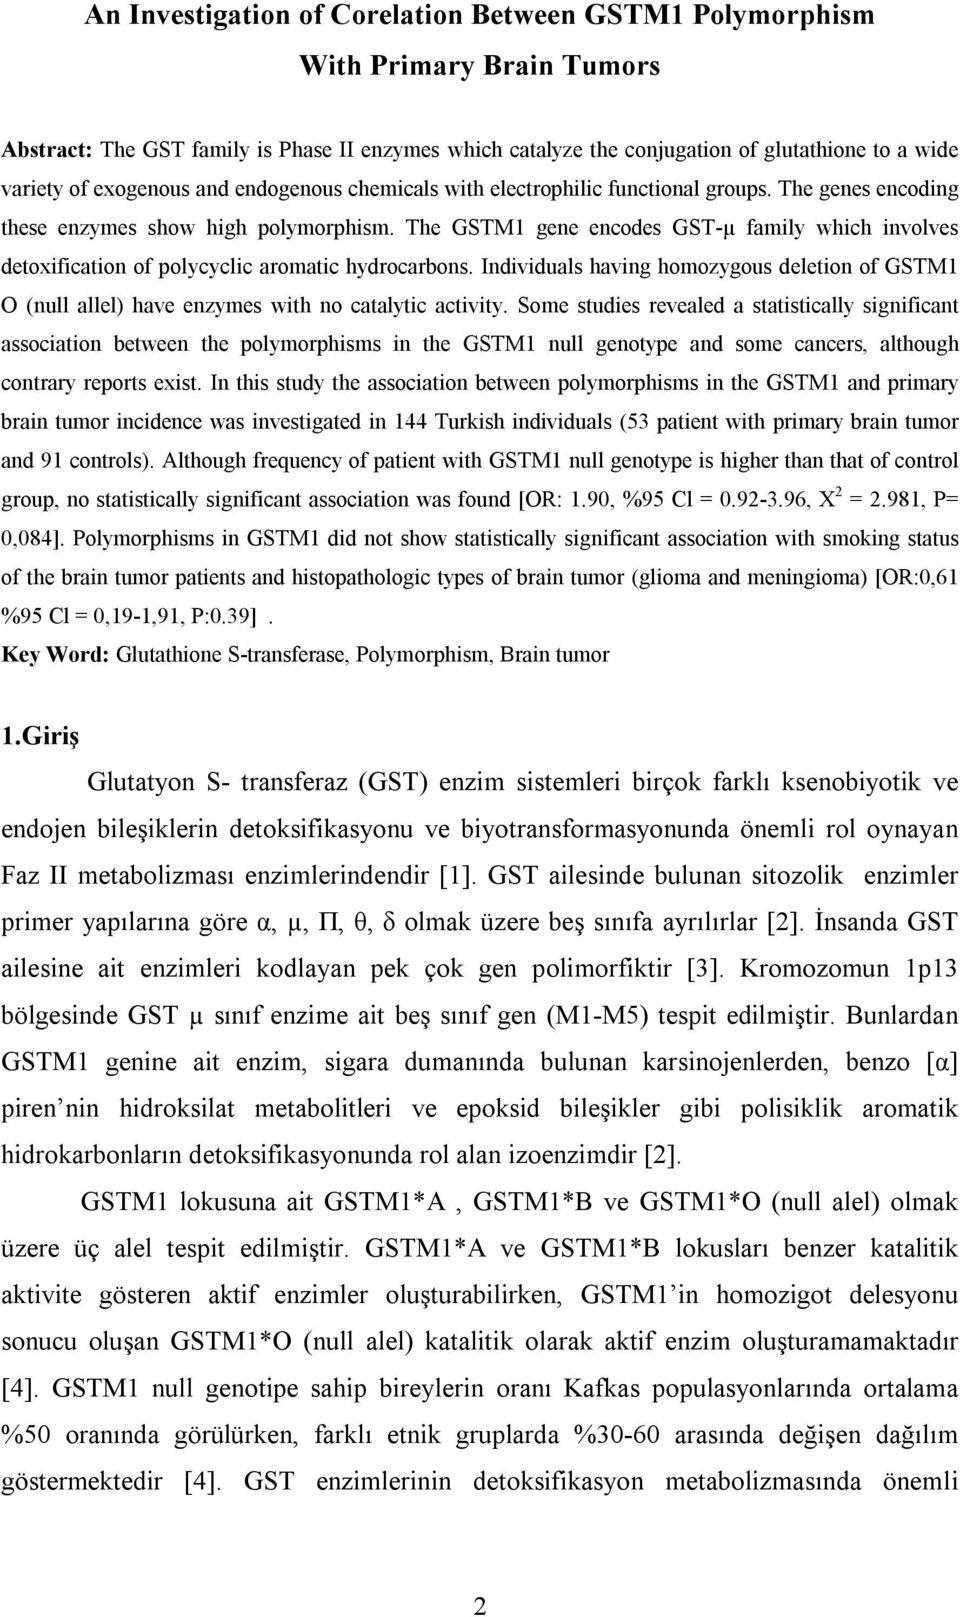 The GSTM1 gene encodes GST-µ family which involves detoxification of polycyclic aromatic hydrocarbons.